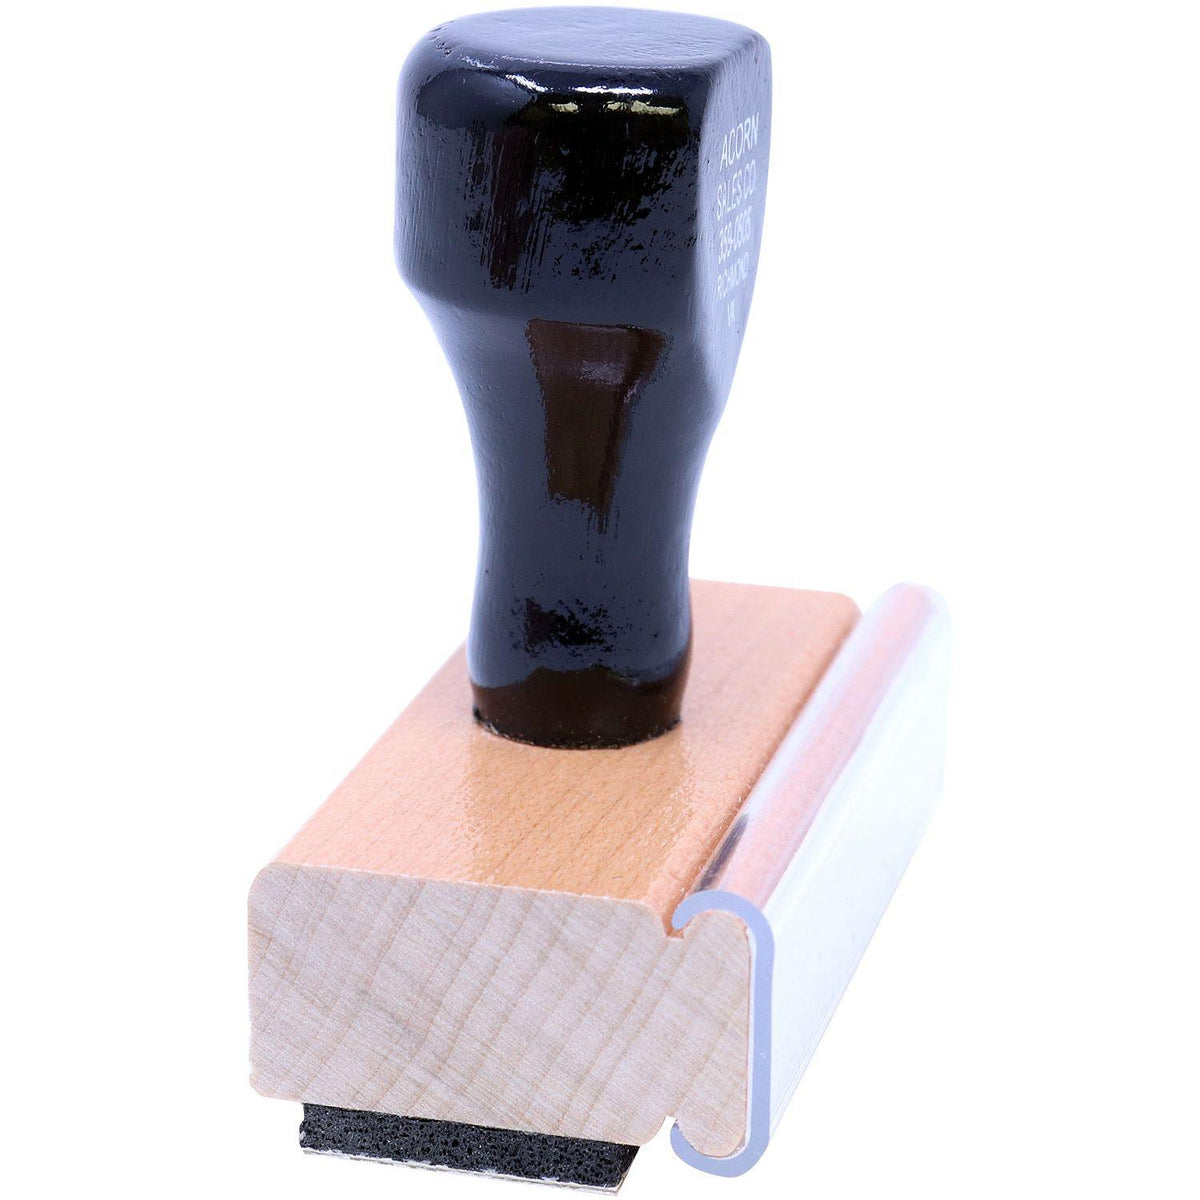 Side View of Large Faxed on Rubber Stamp at an Angle